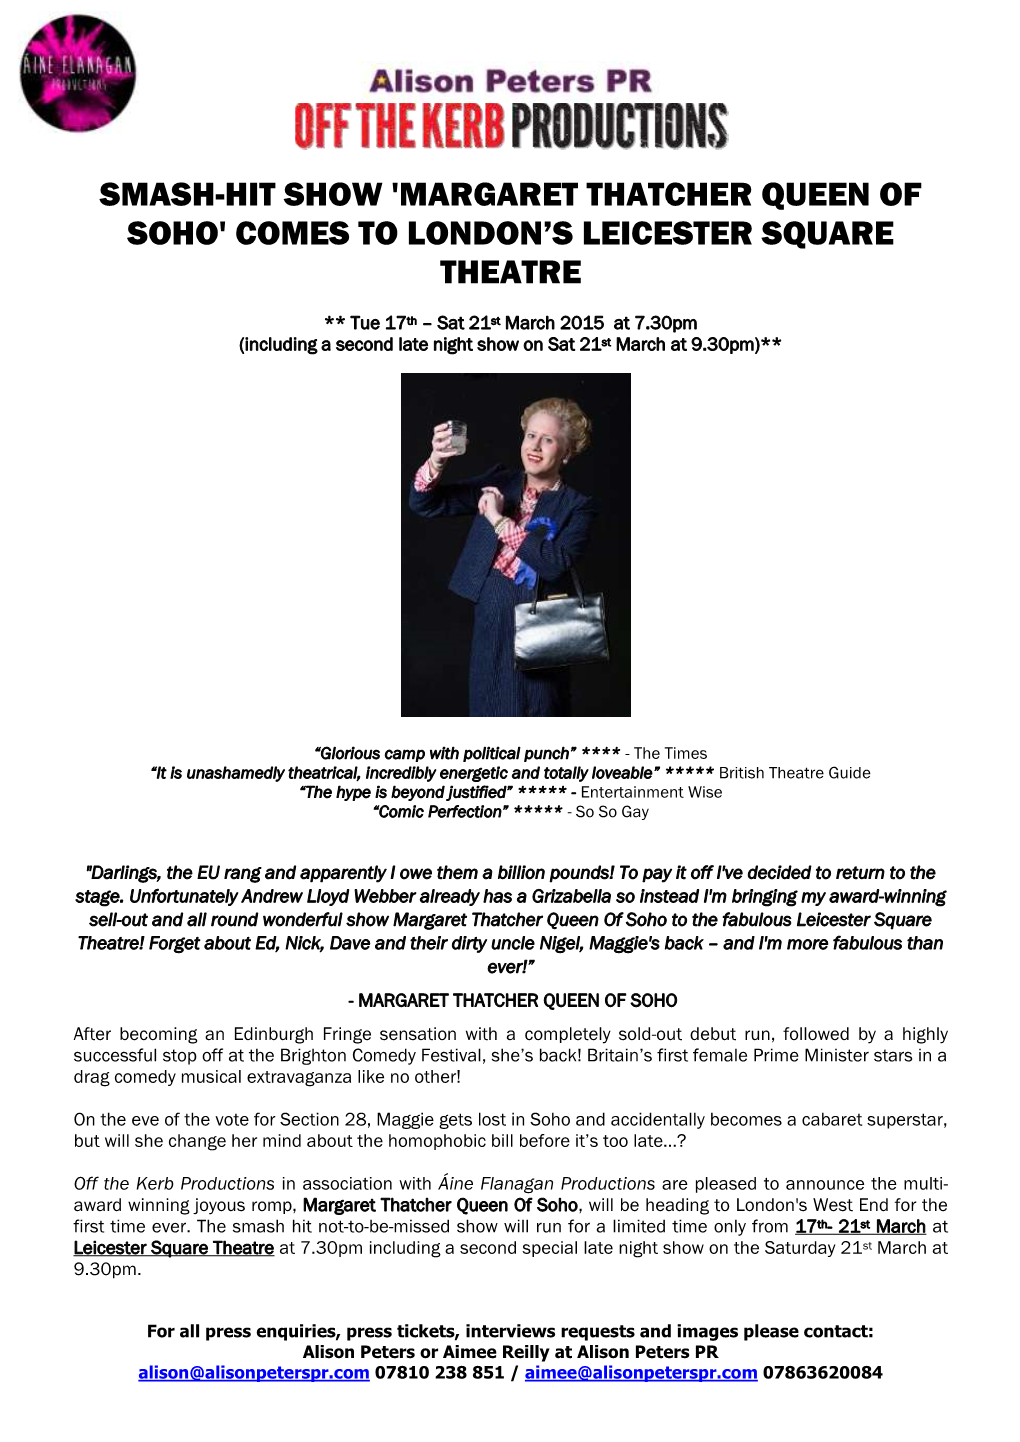 Margaret Thatcher Queen of Soho' Comes to London’S Leicester Square Theatre